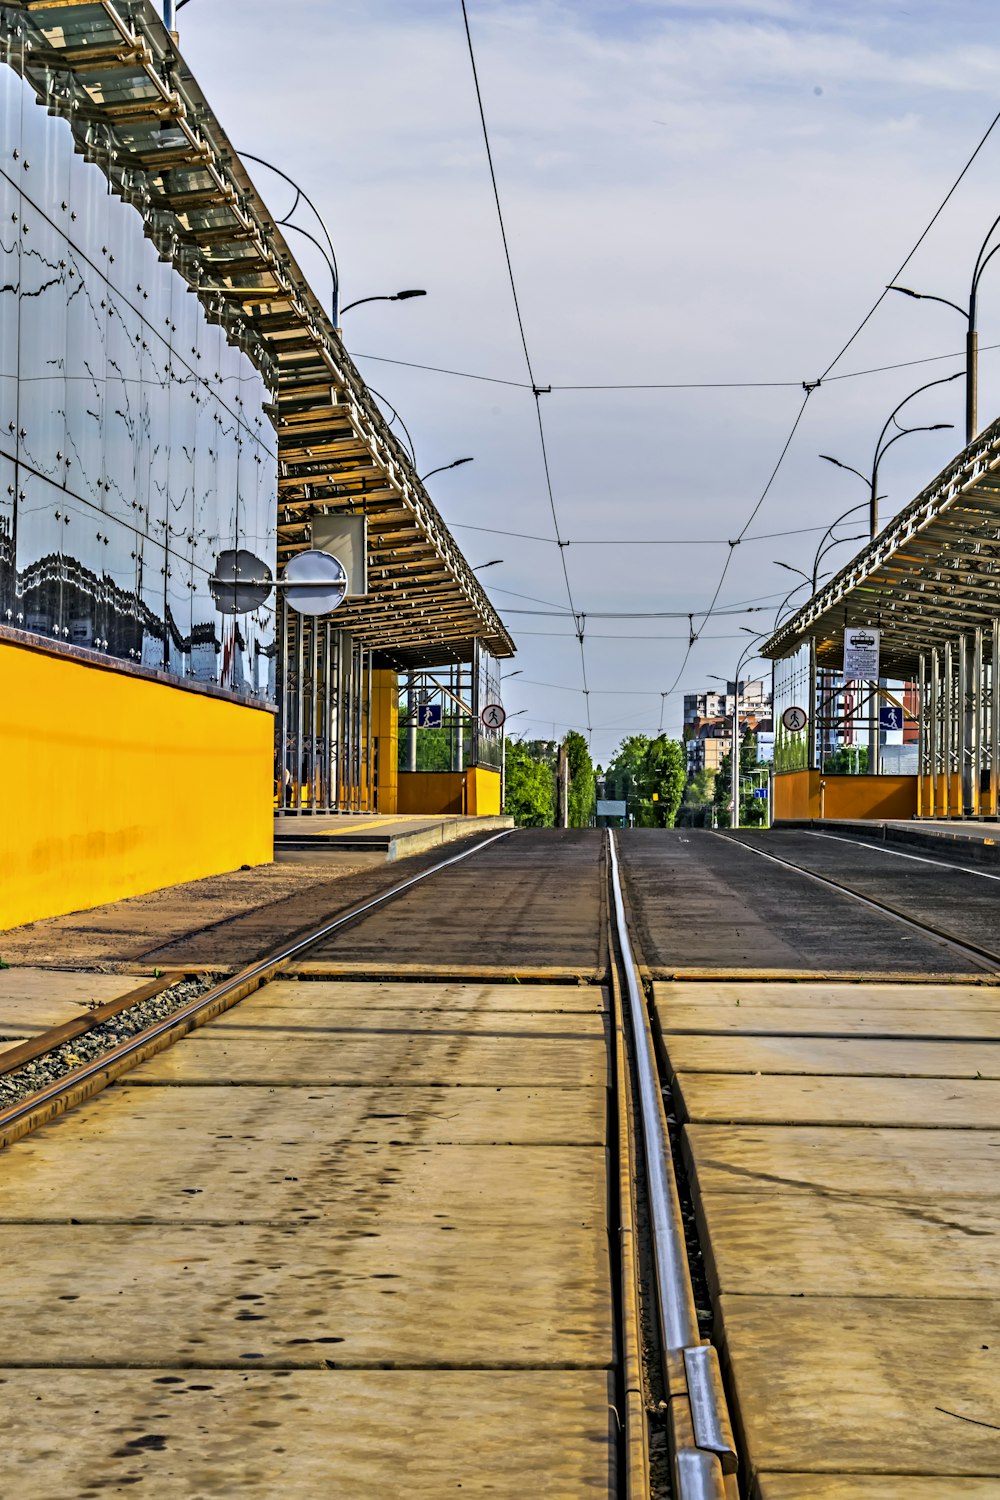 a train track with a yellow building in the background